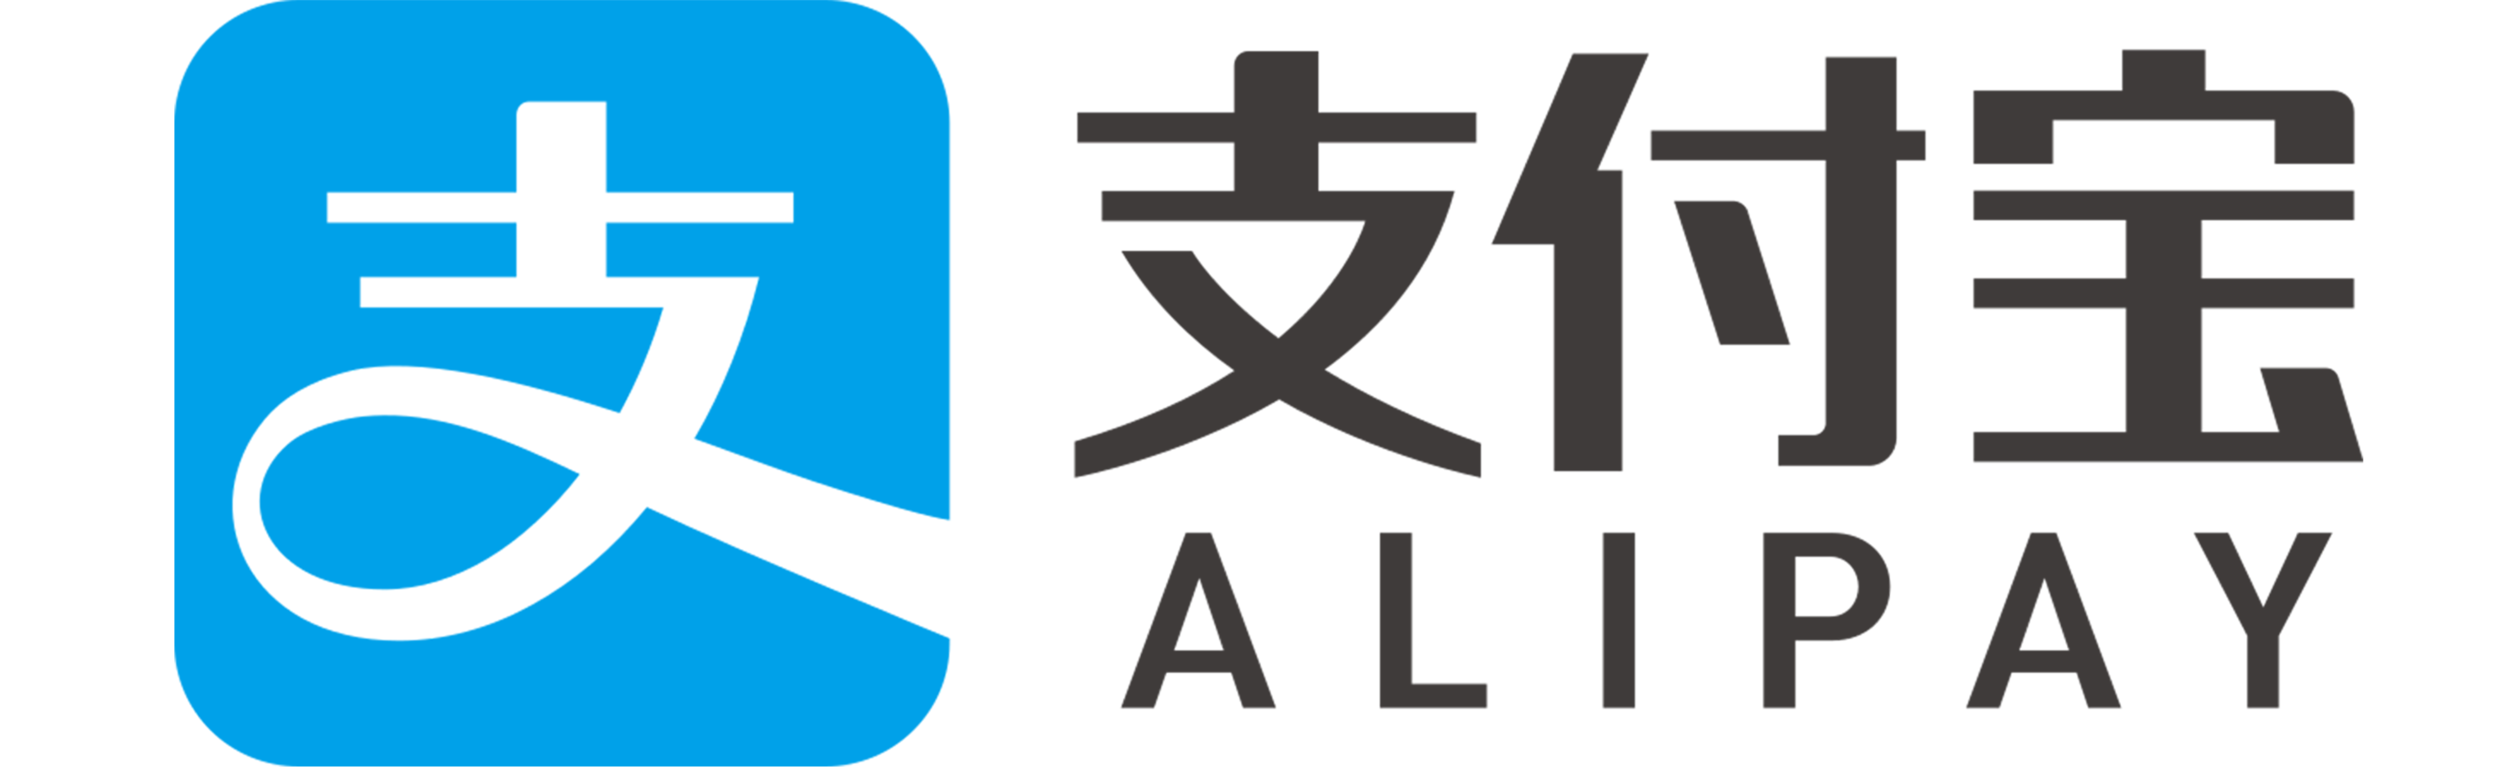 Alipay (1).png